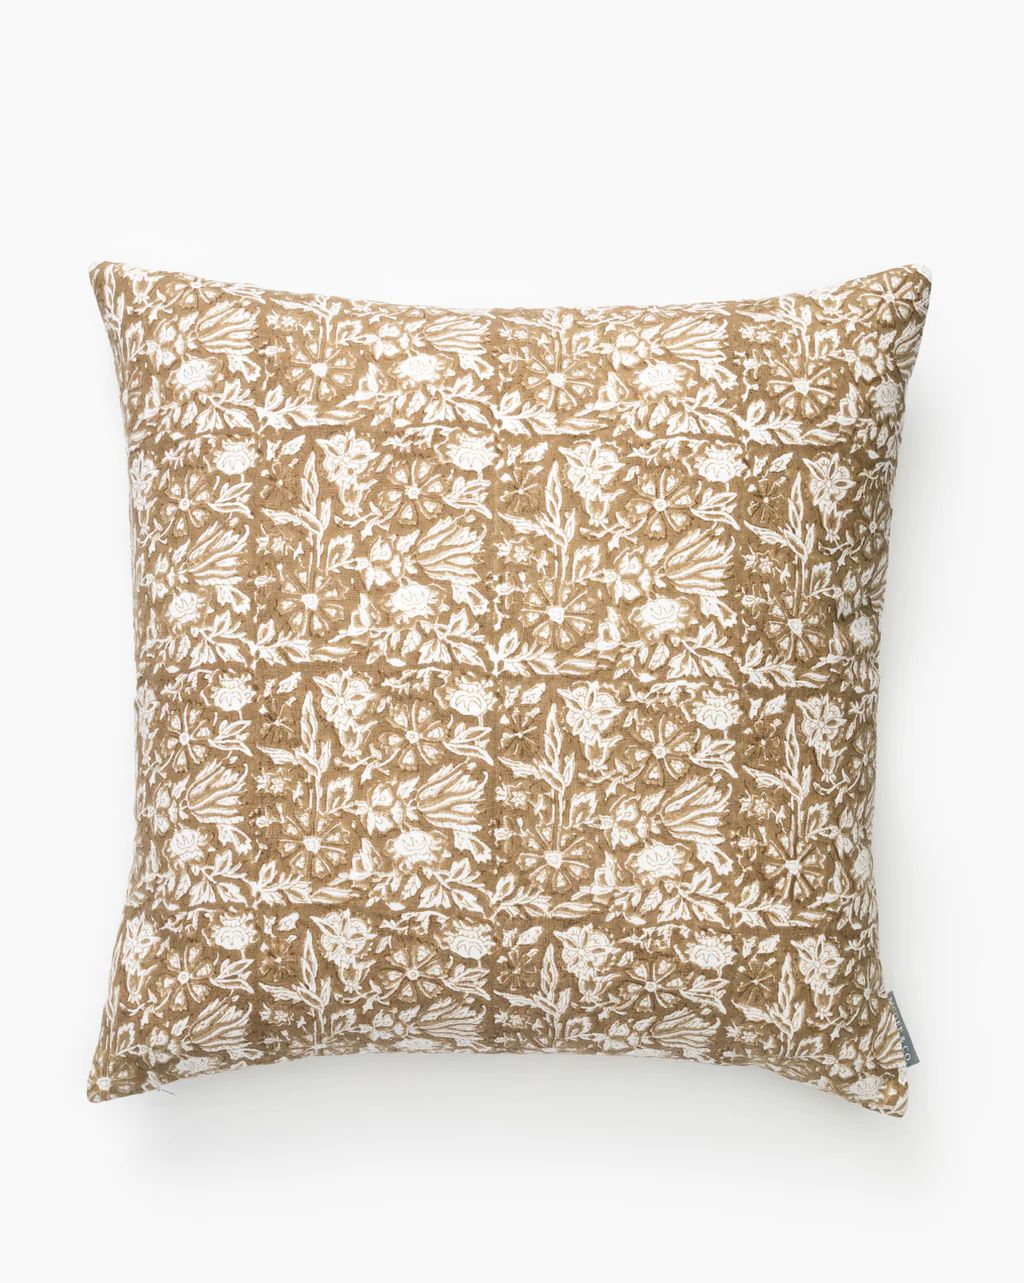 Jentry Block Print Pillow Cover | McGee & Co.